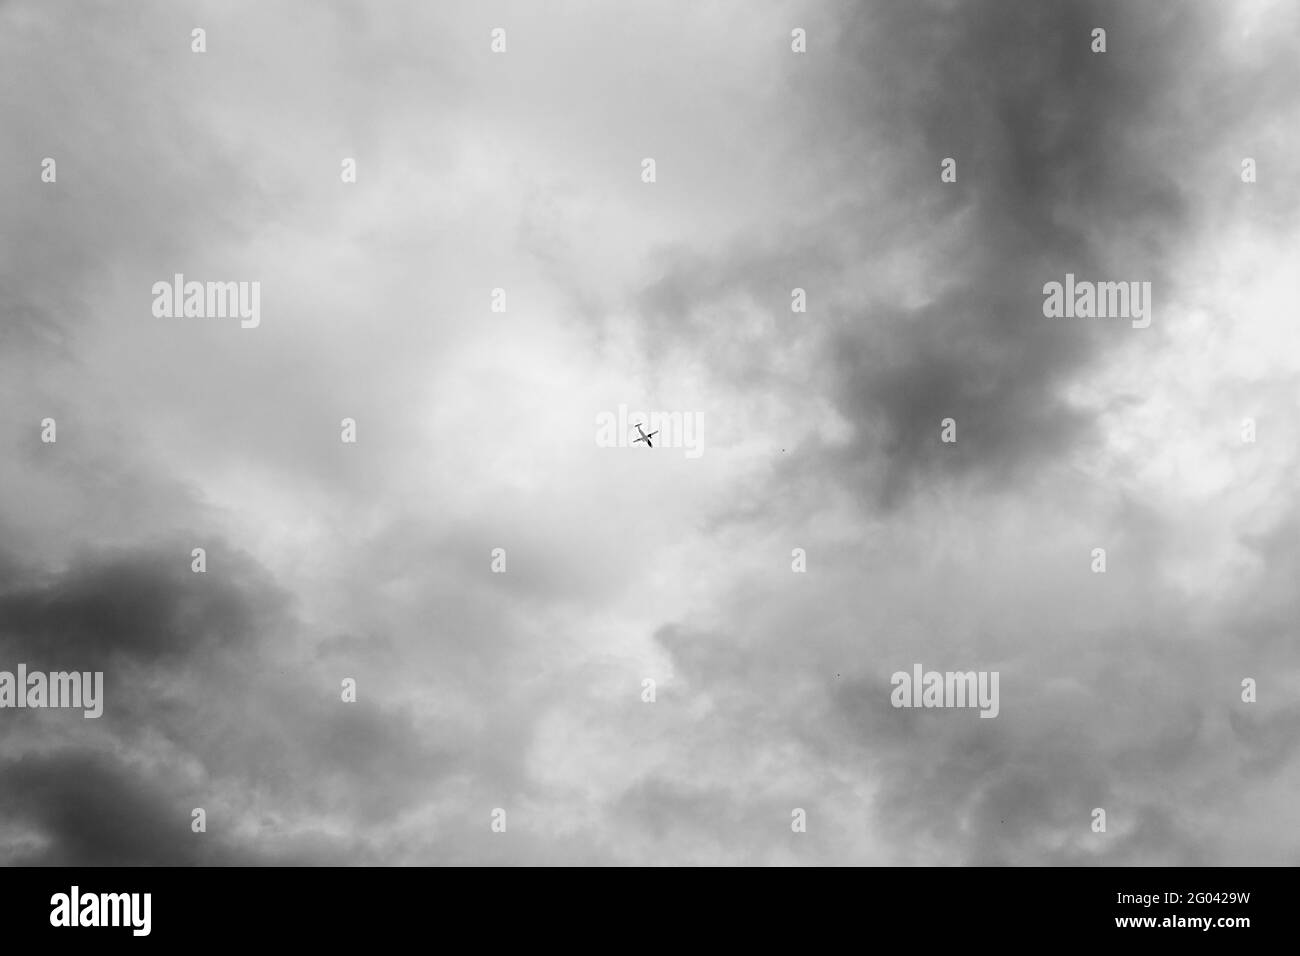 Black and white photo, bottom view of a passenger plane taking off or landing against a bright blue sky. Aerospace industry or tourism industry. Stock Photo